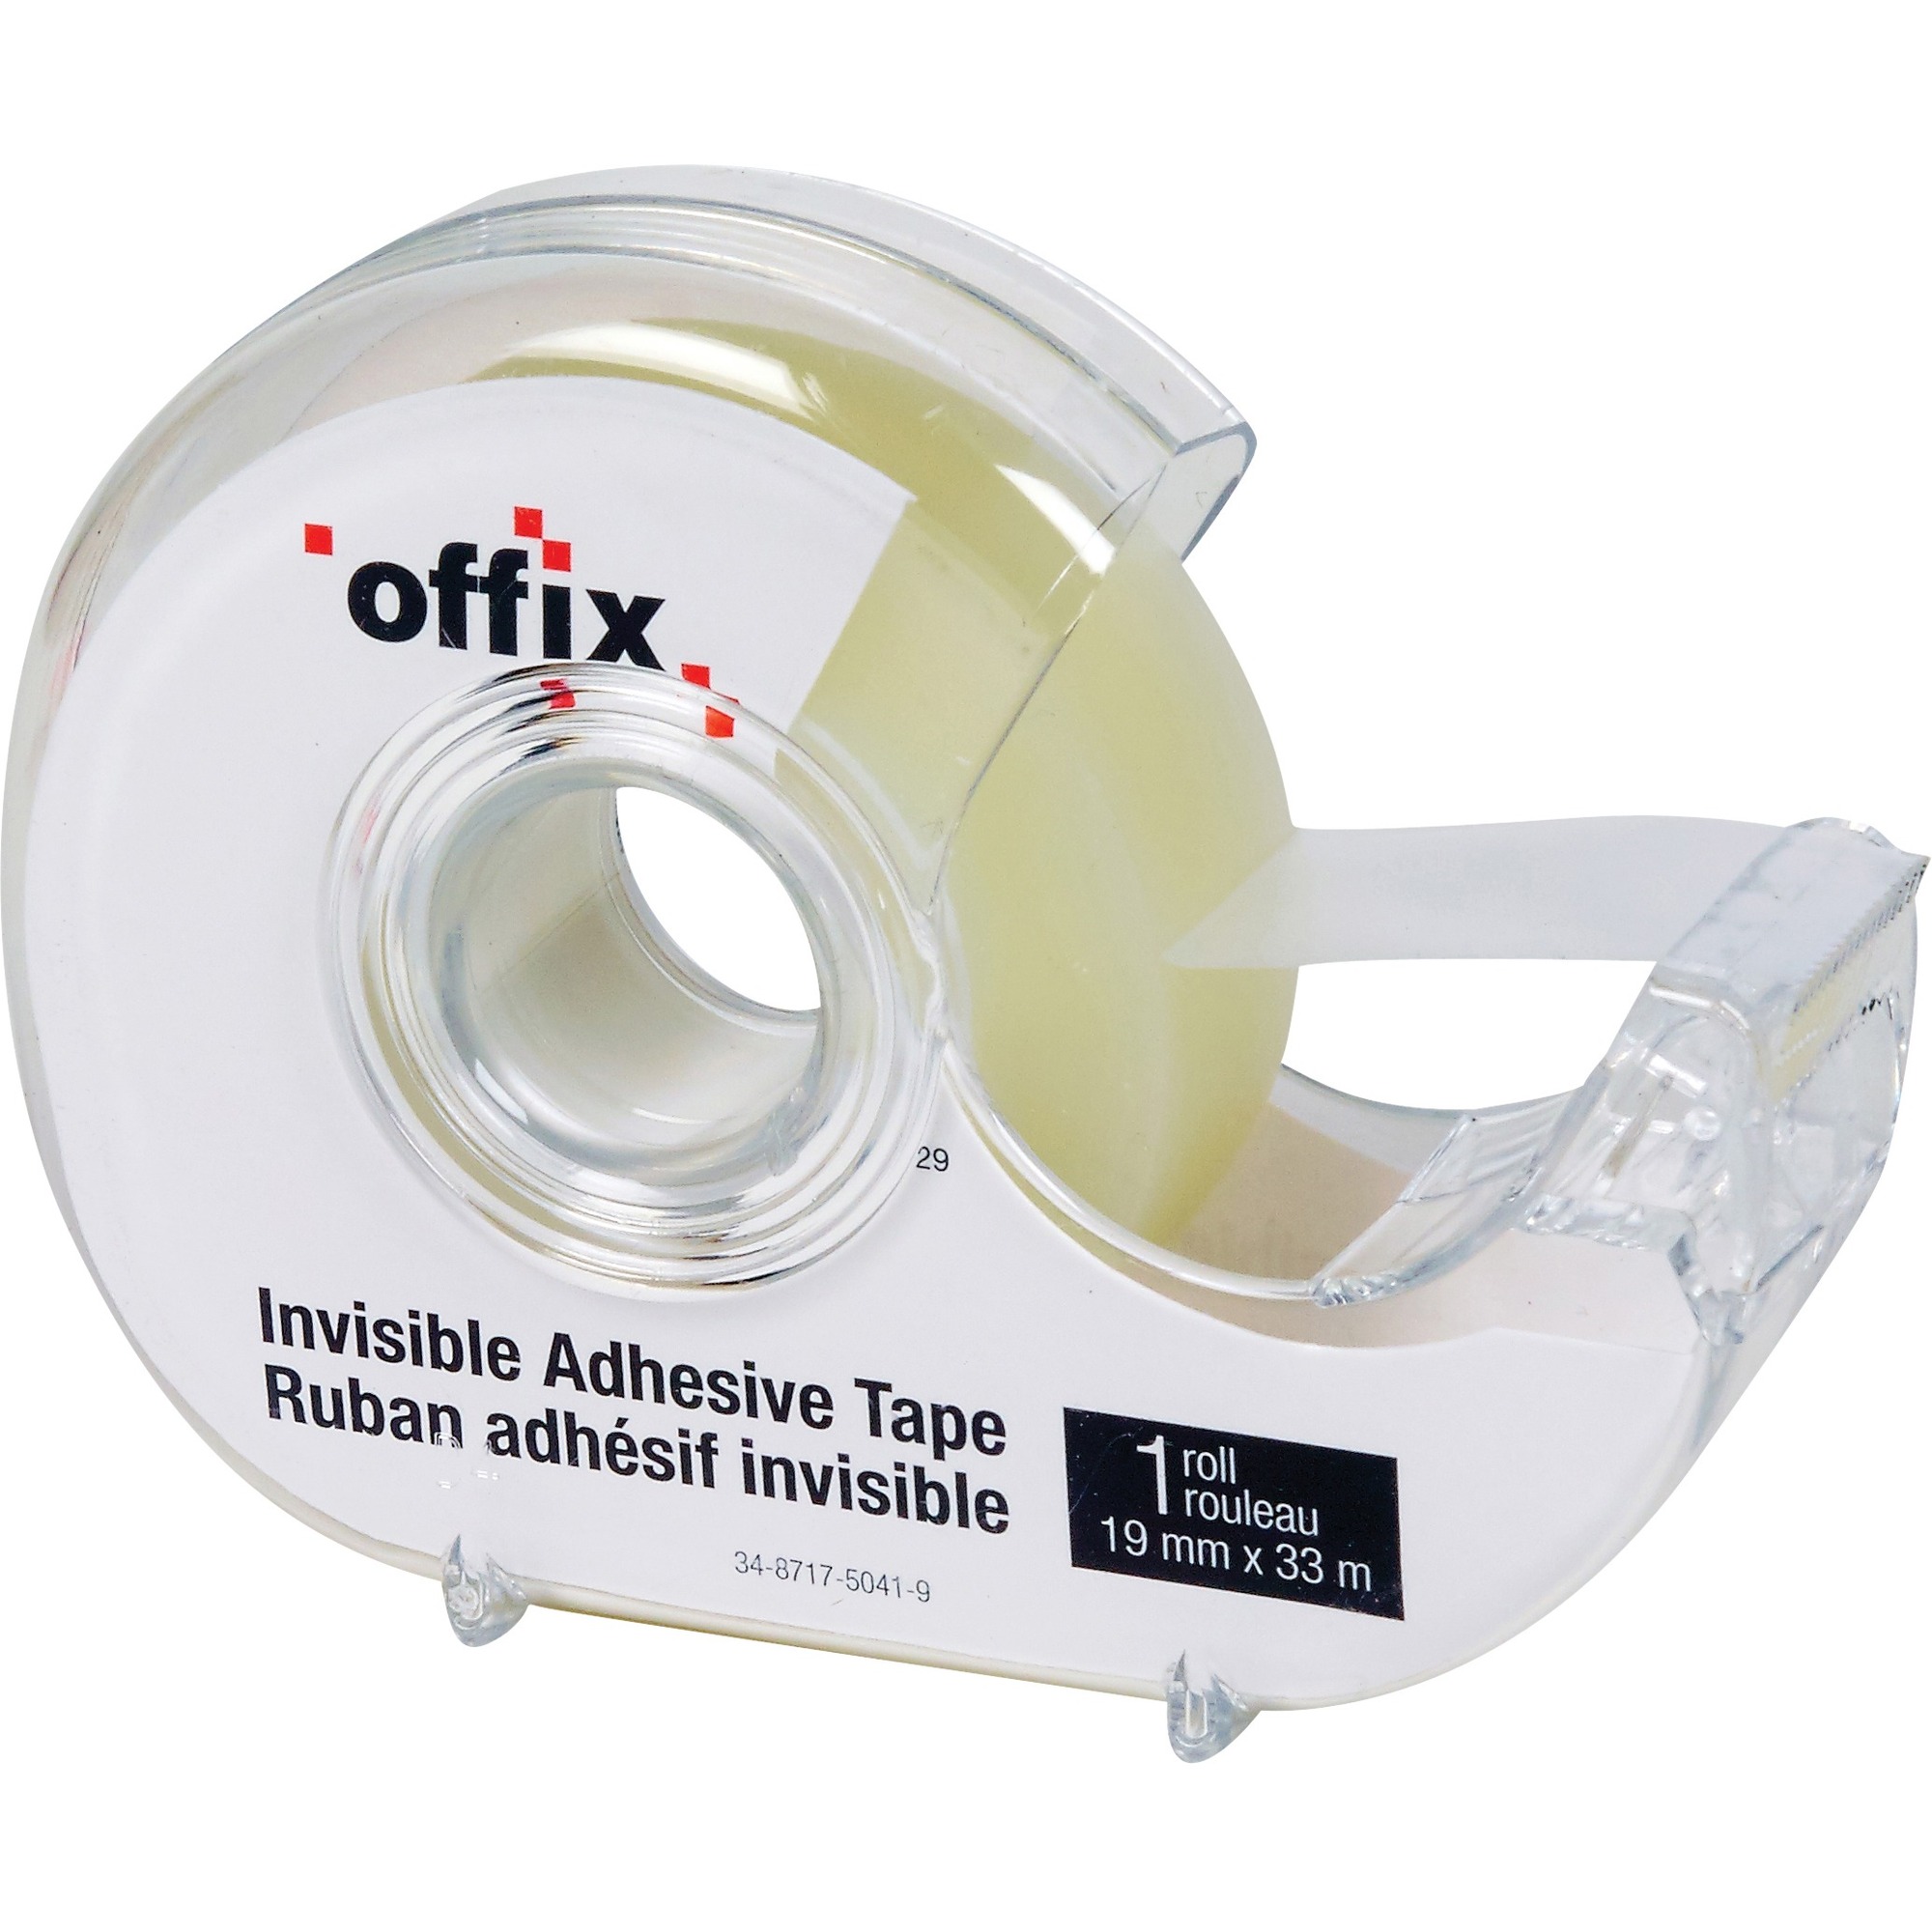 Offix Invisible Tape 36 yd (32.9 m) Length x 0.75" (19 mm) Width with Dispenser - Each